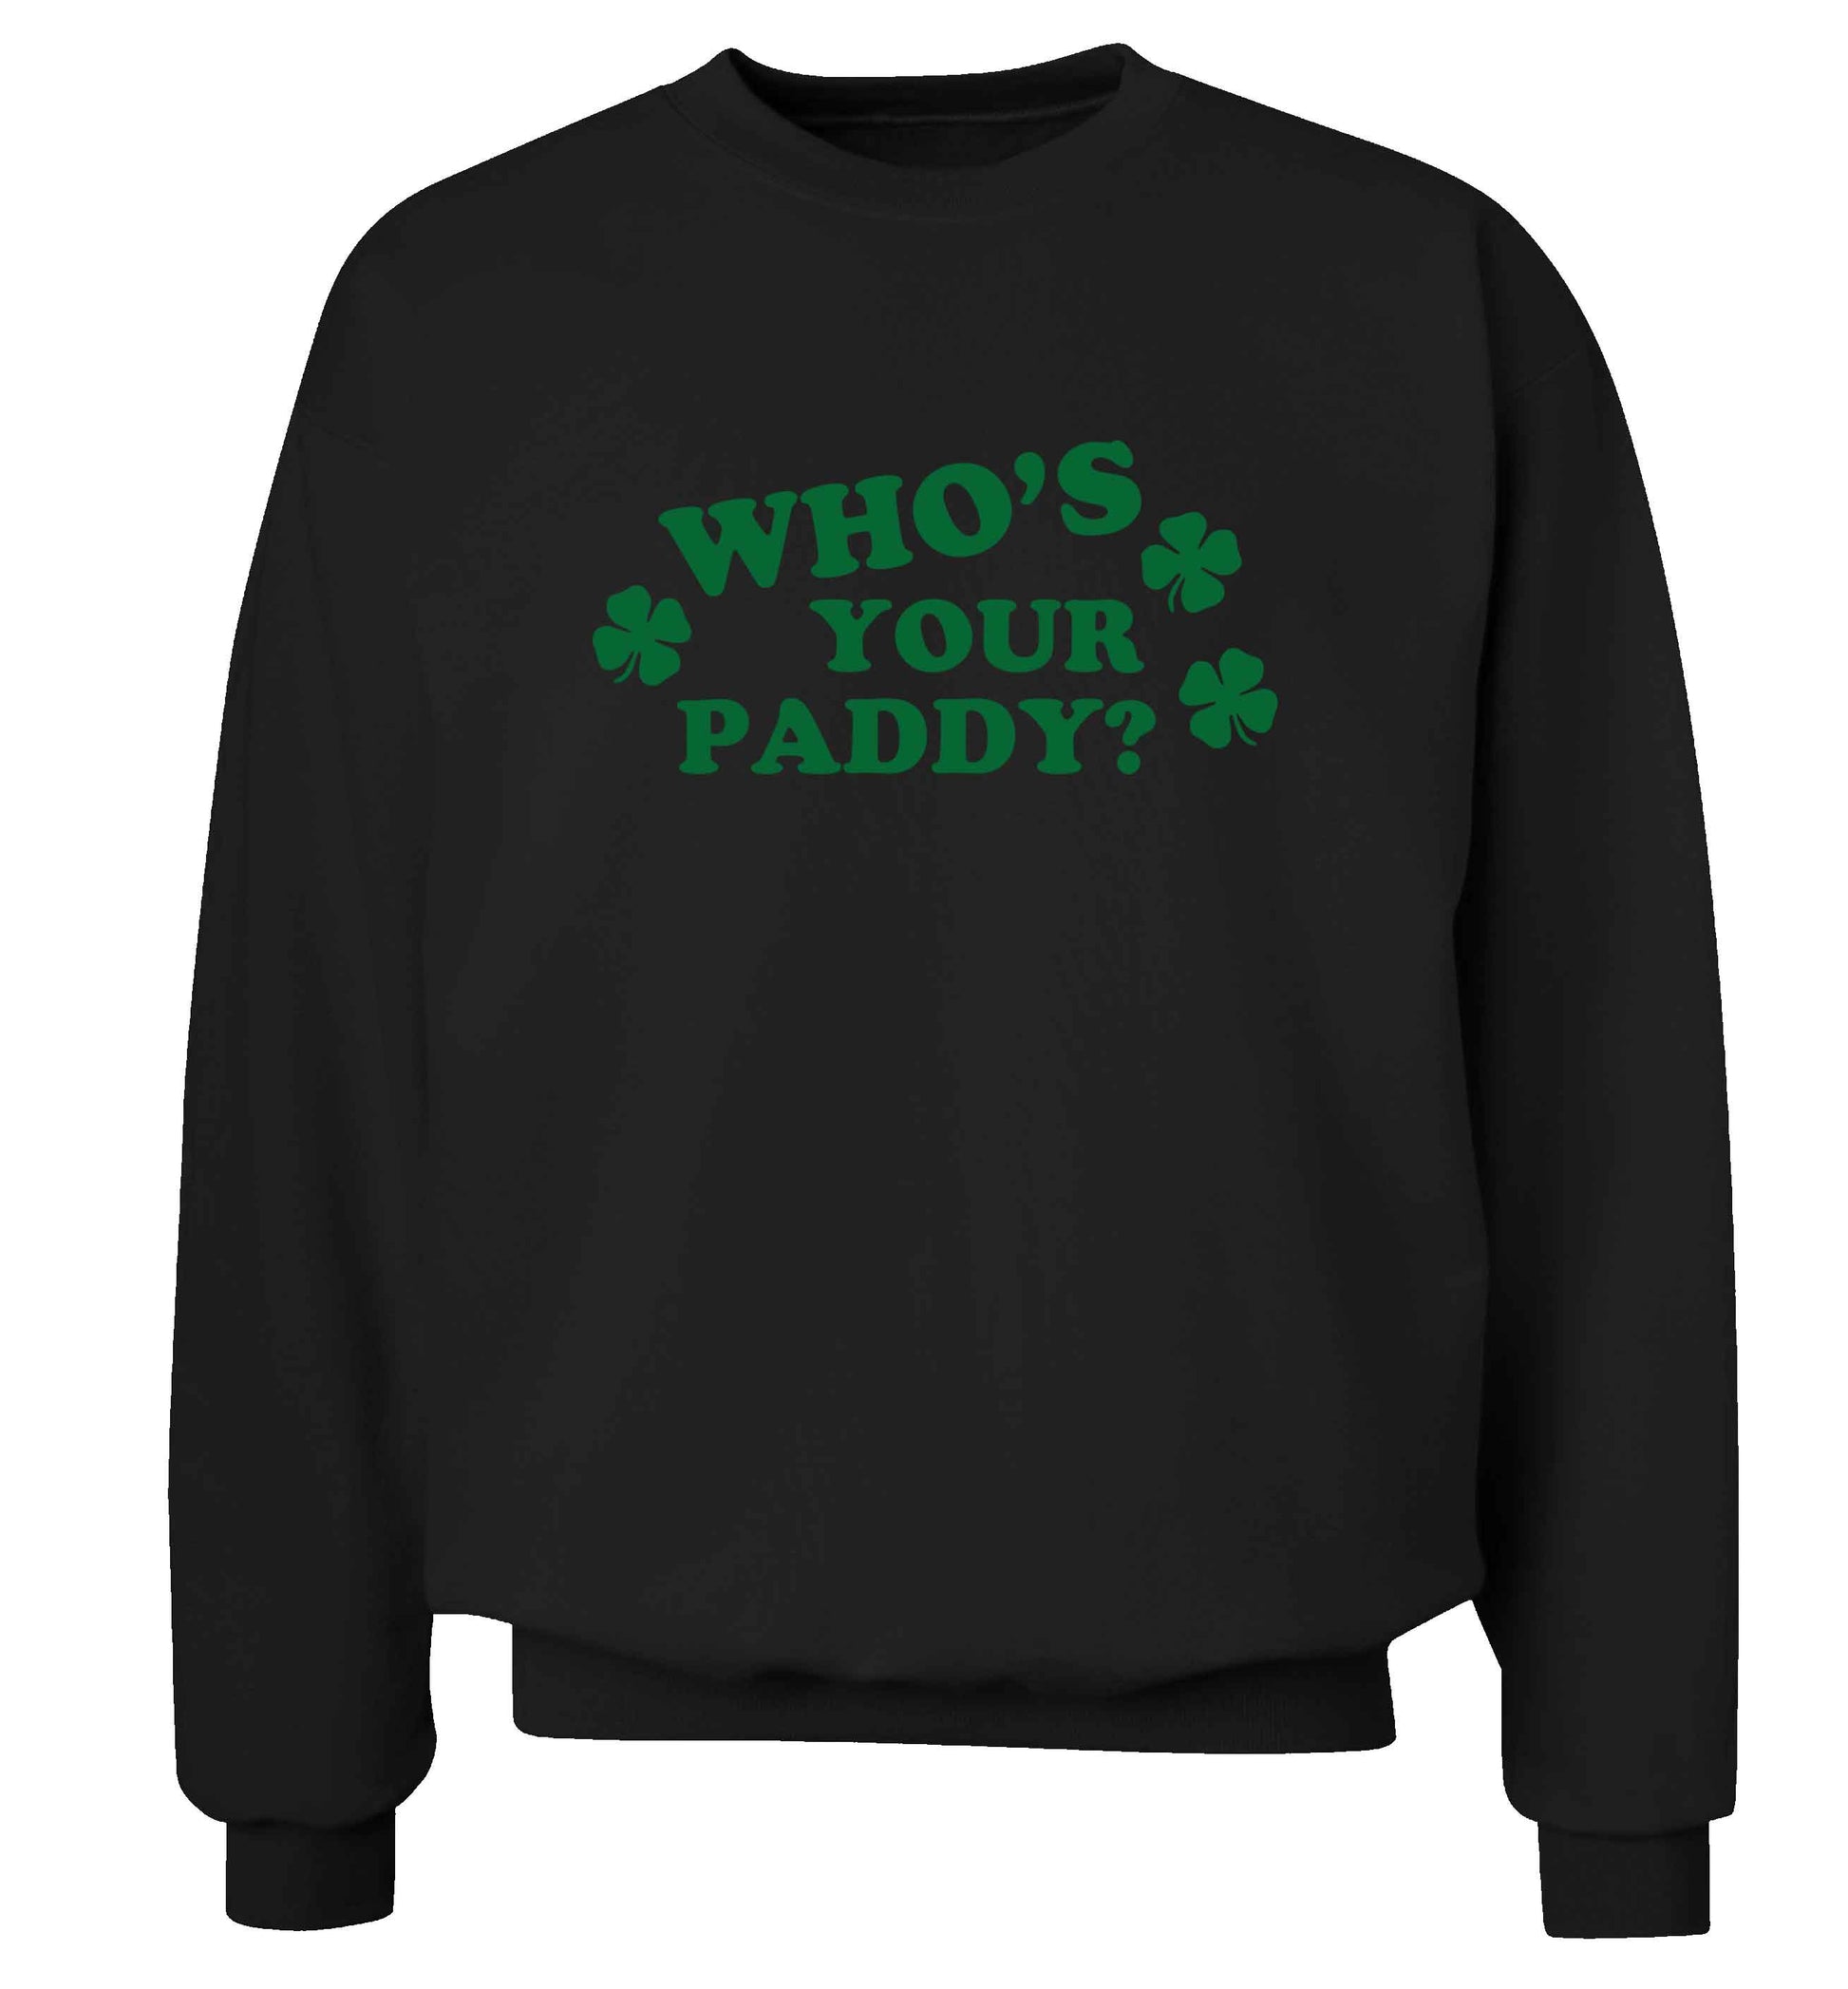 Who's your paddy? adult's unisex black sweater 2XL